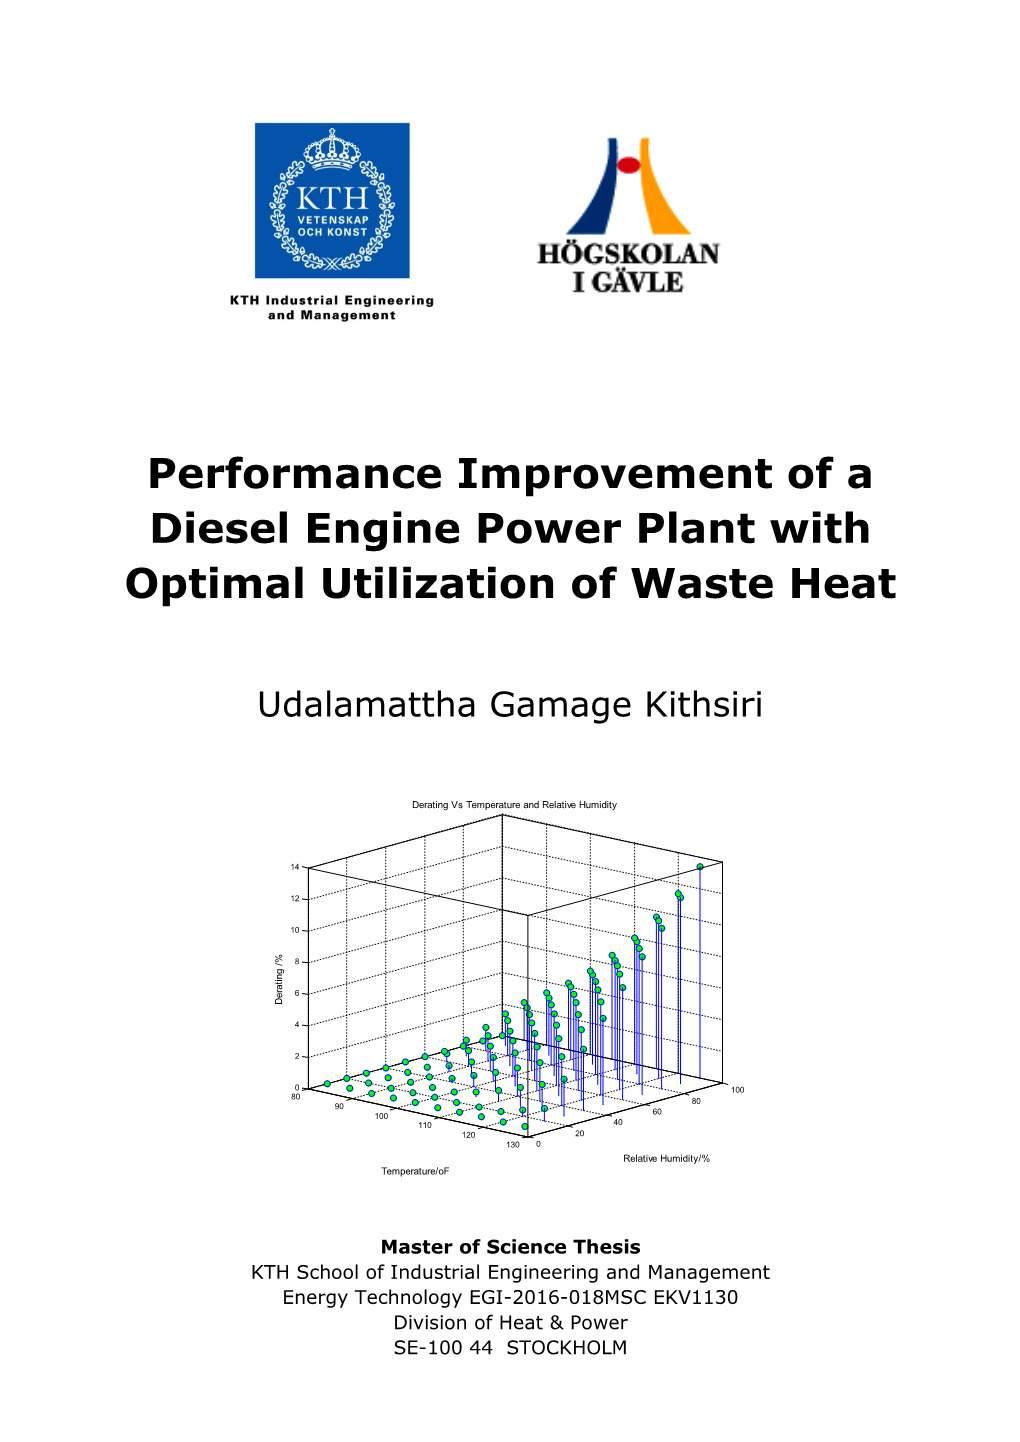 Performance Improvement of a Diesel Engine Power Plant with Optimal Utilization of Waste Heat